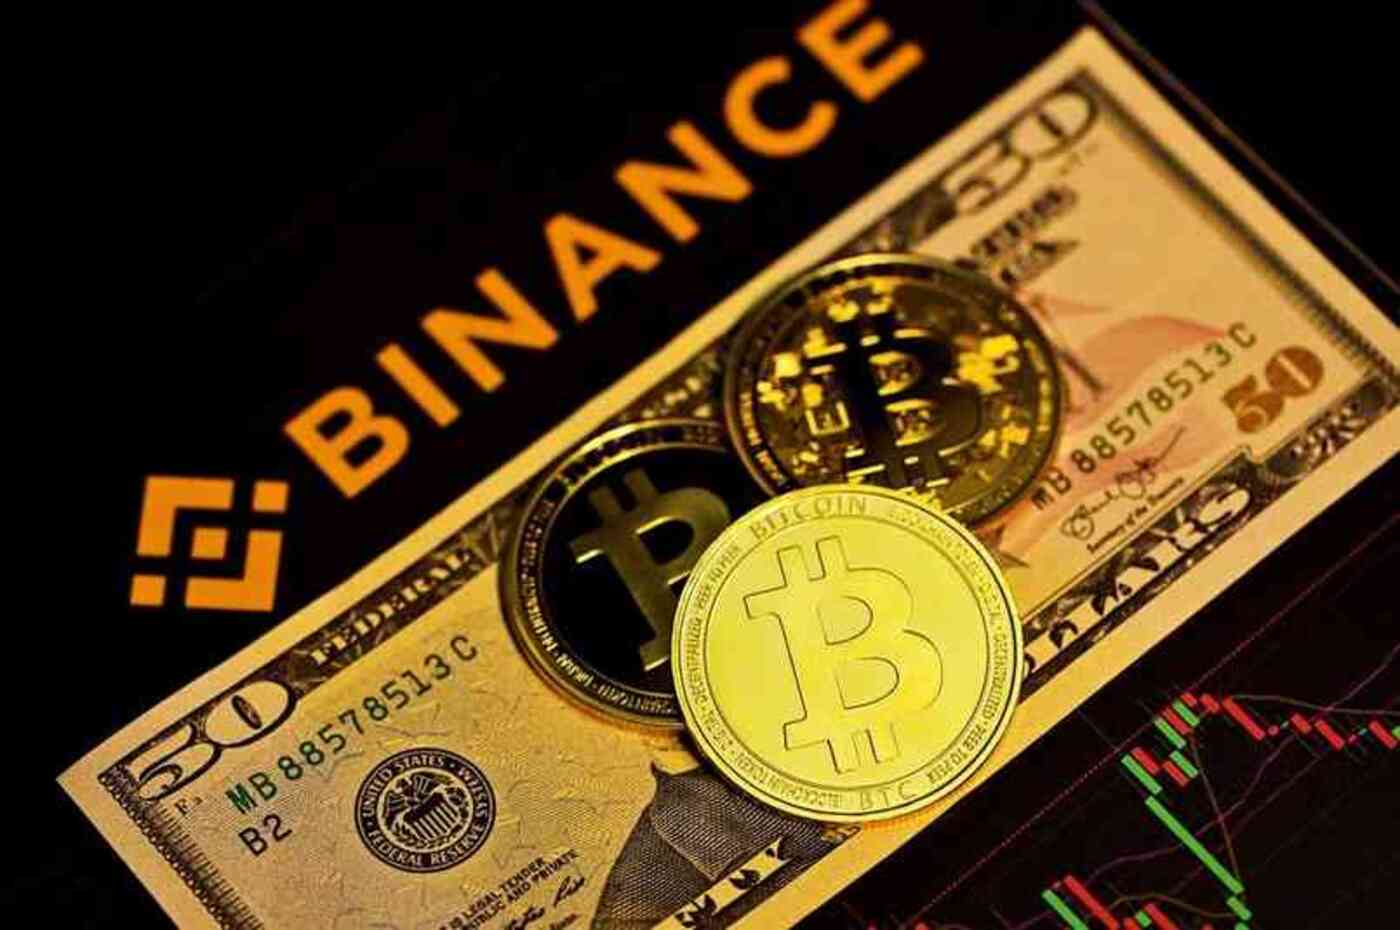 Binance US Suspends Trading In Dollars After SEC Crackdown